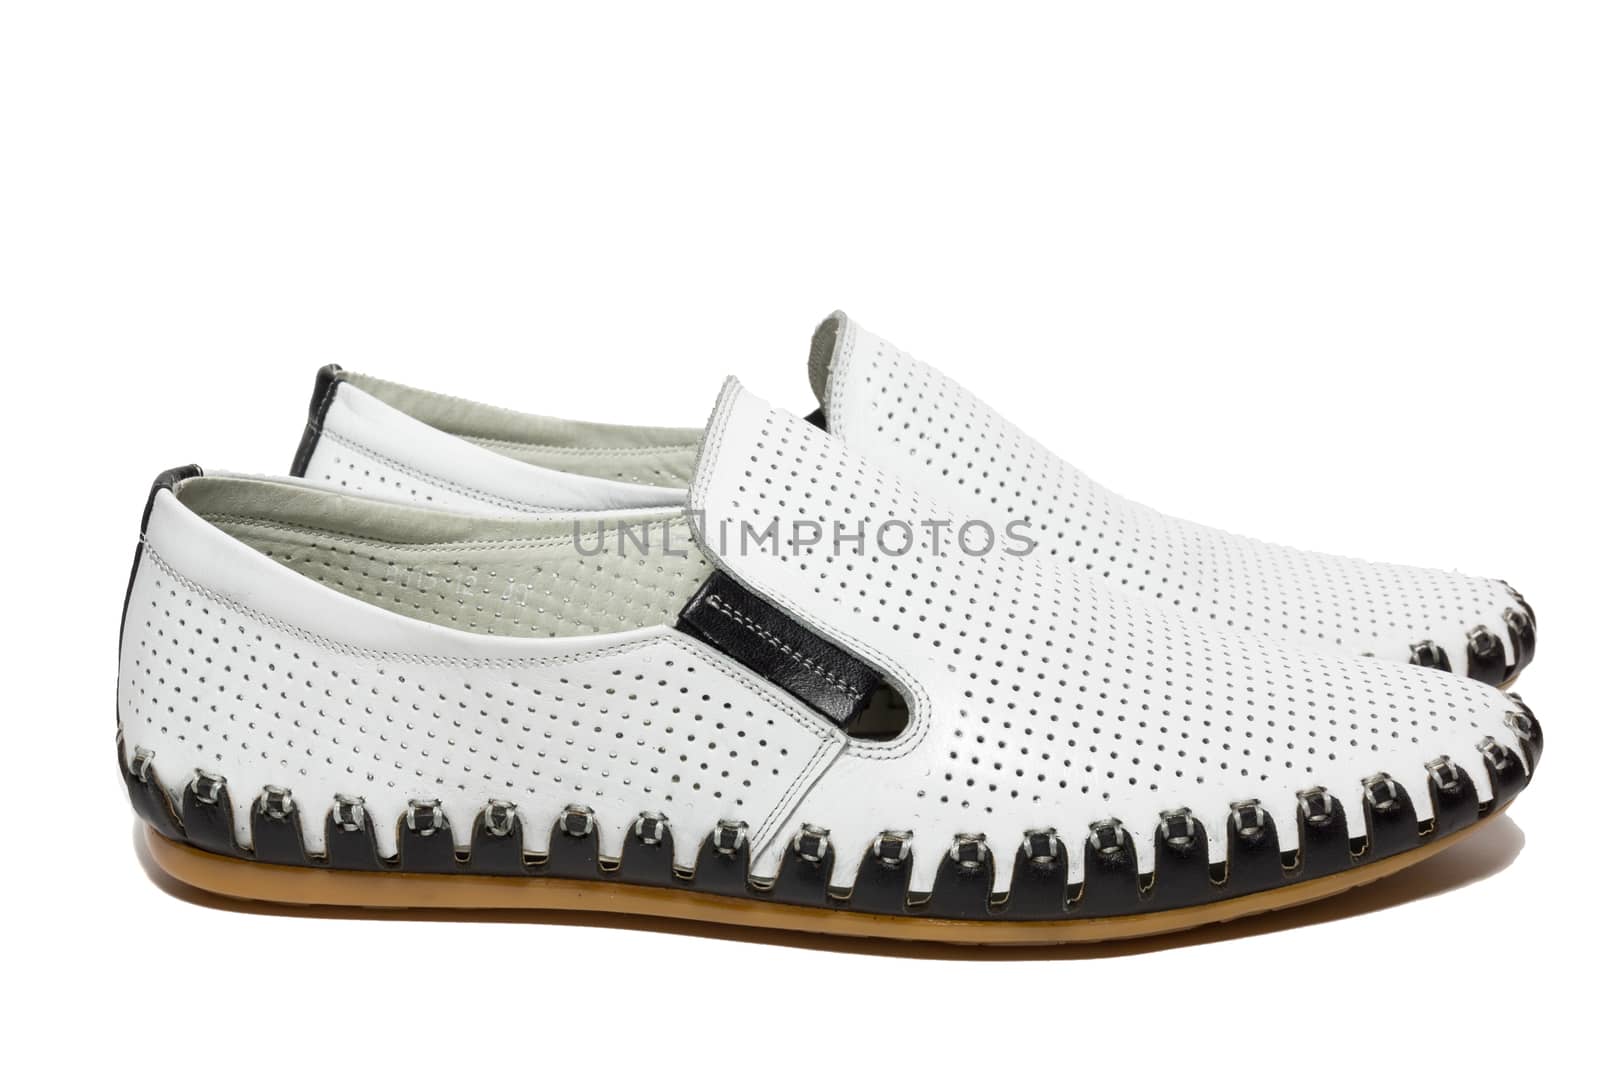 The photo shows the shoes on a white background